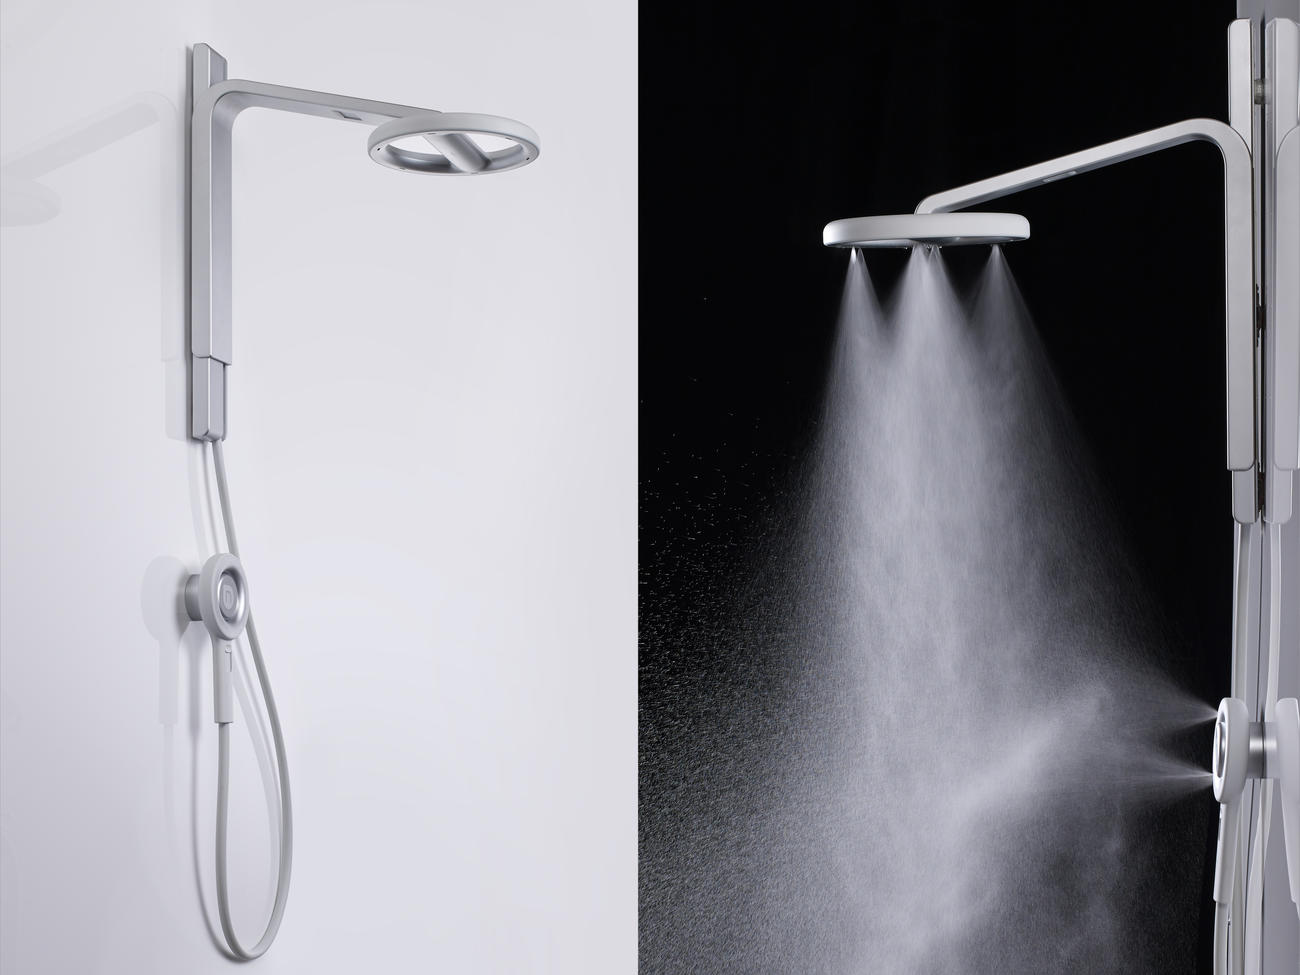 The most luxurious, water-saving showerhead ever